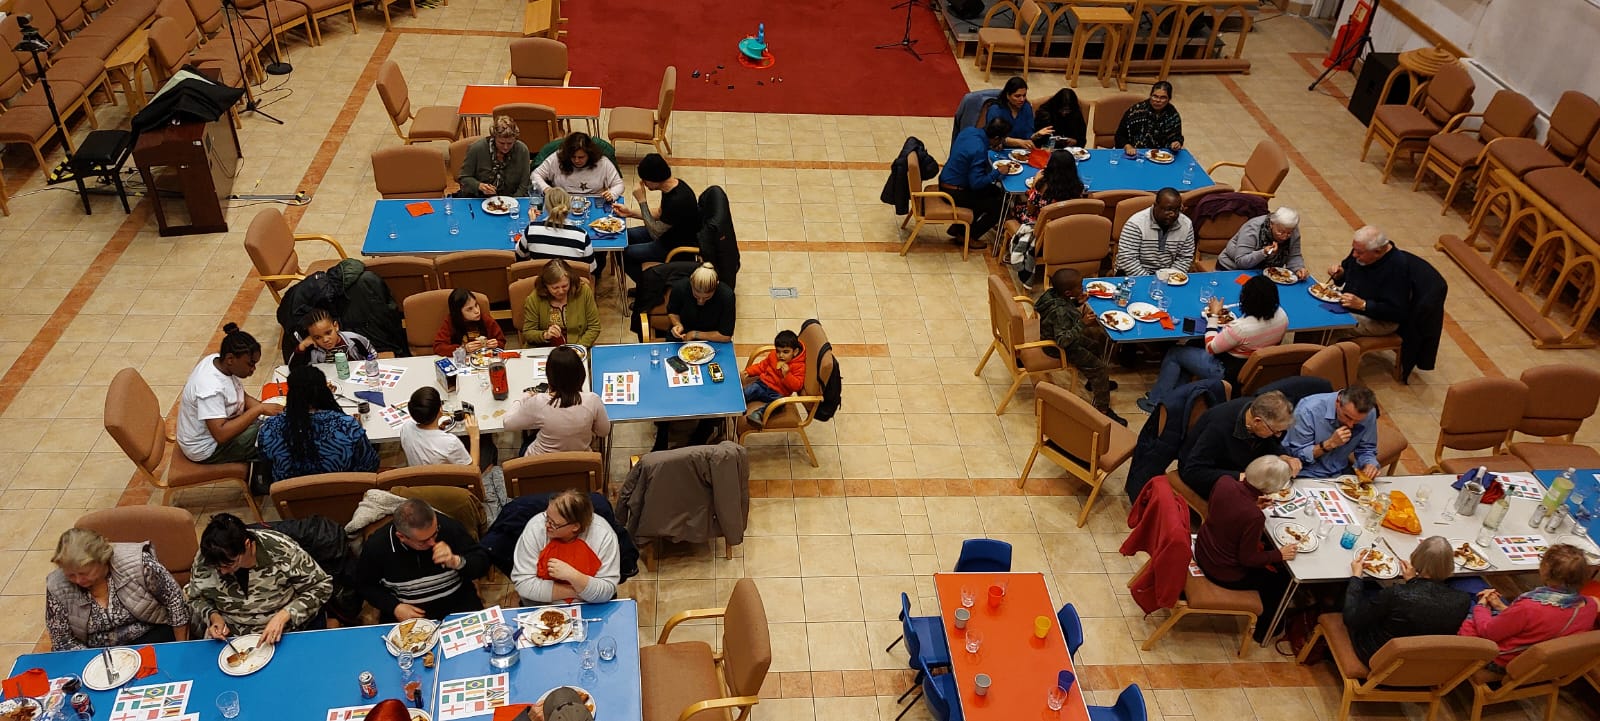 Aerial shot of people sat at groups of tables in a large room eating and in conversation